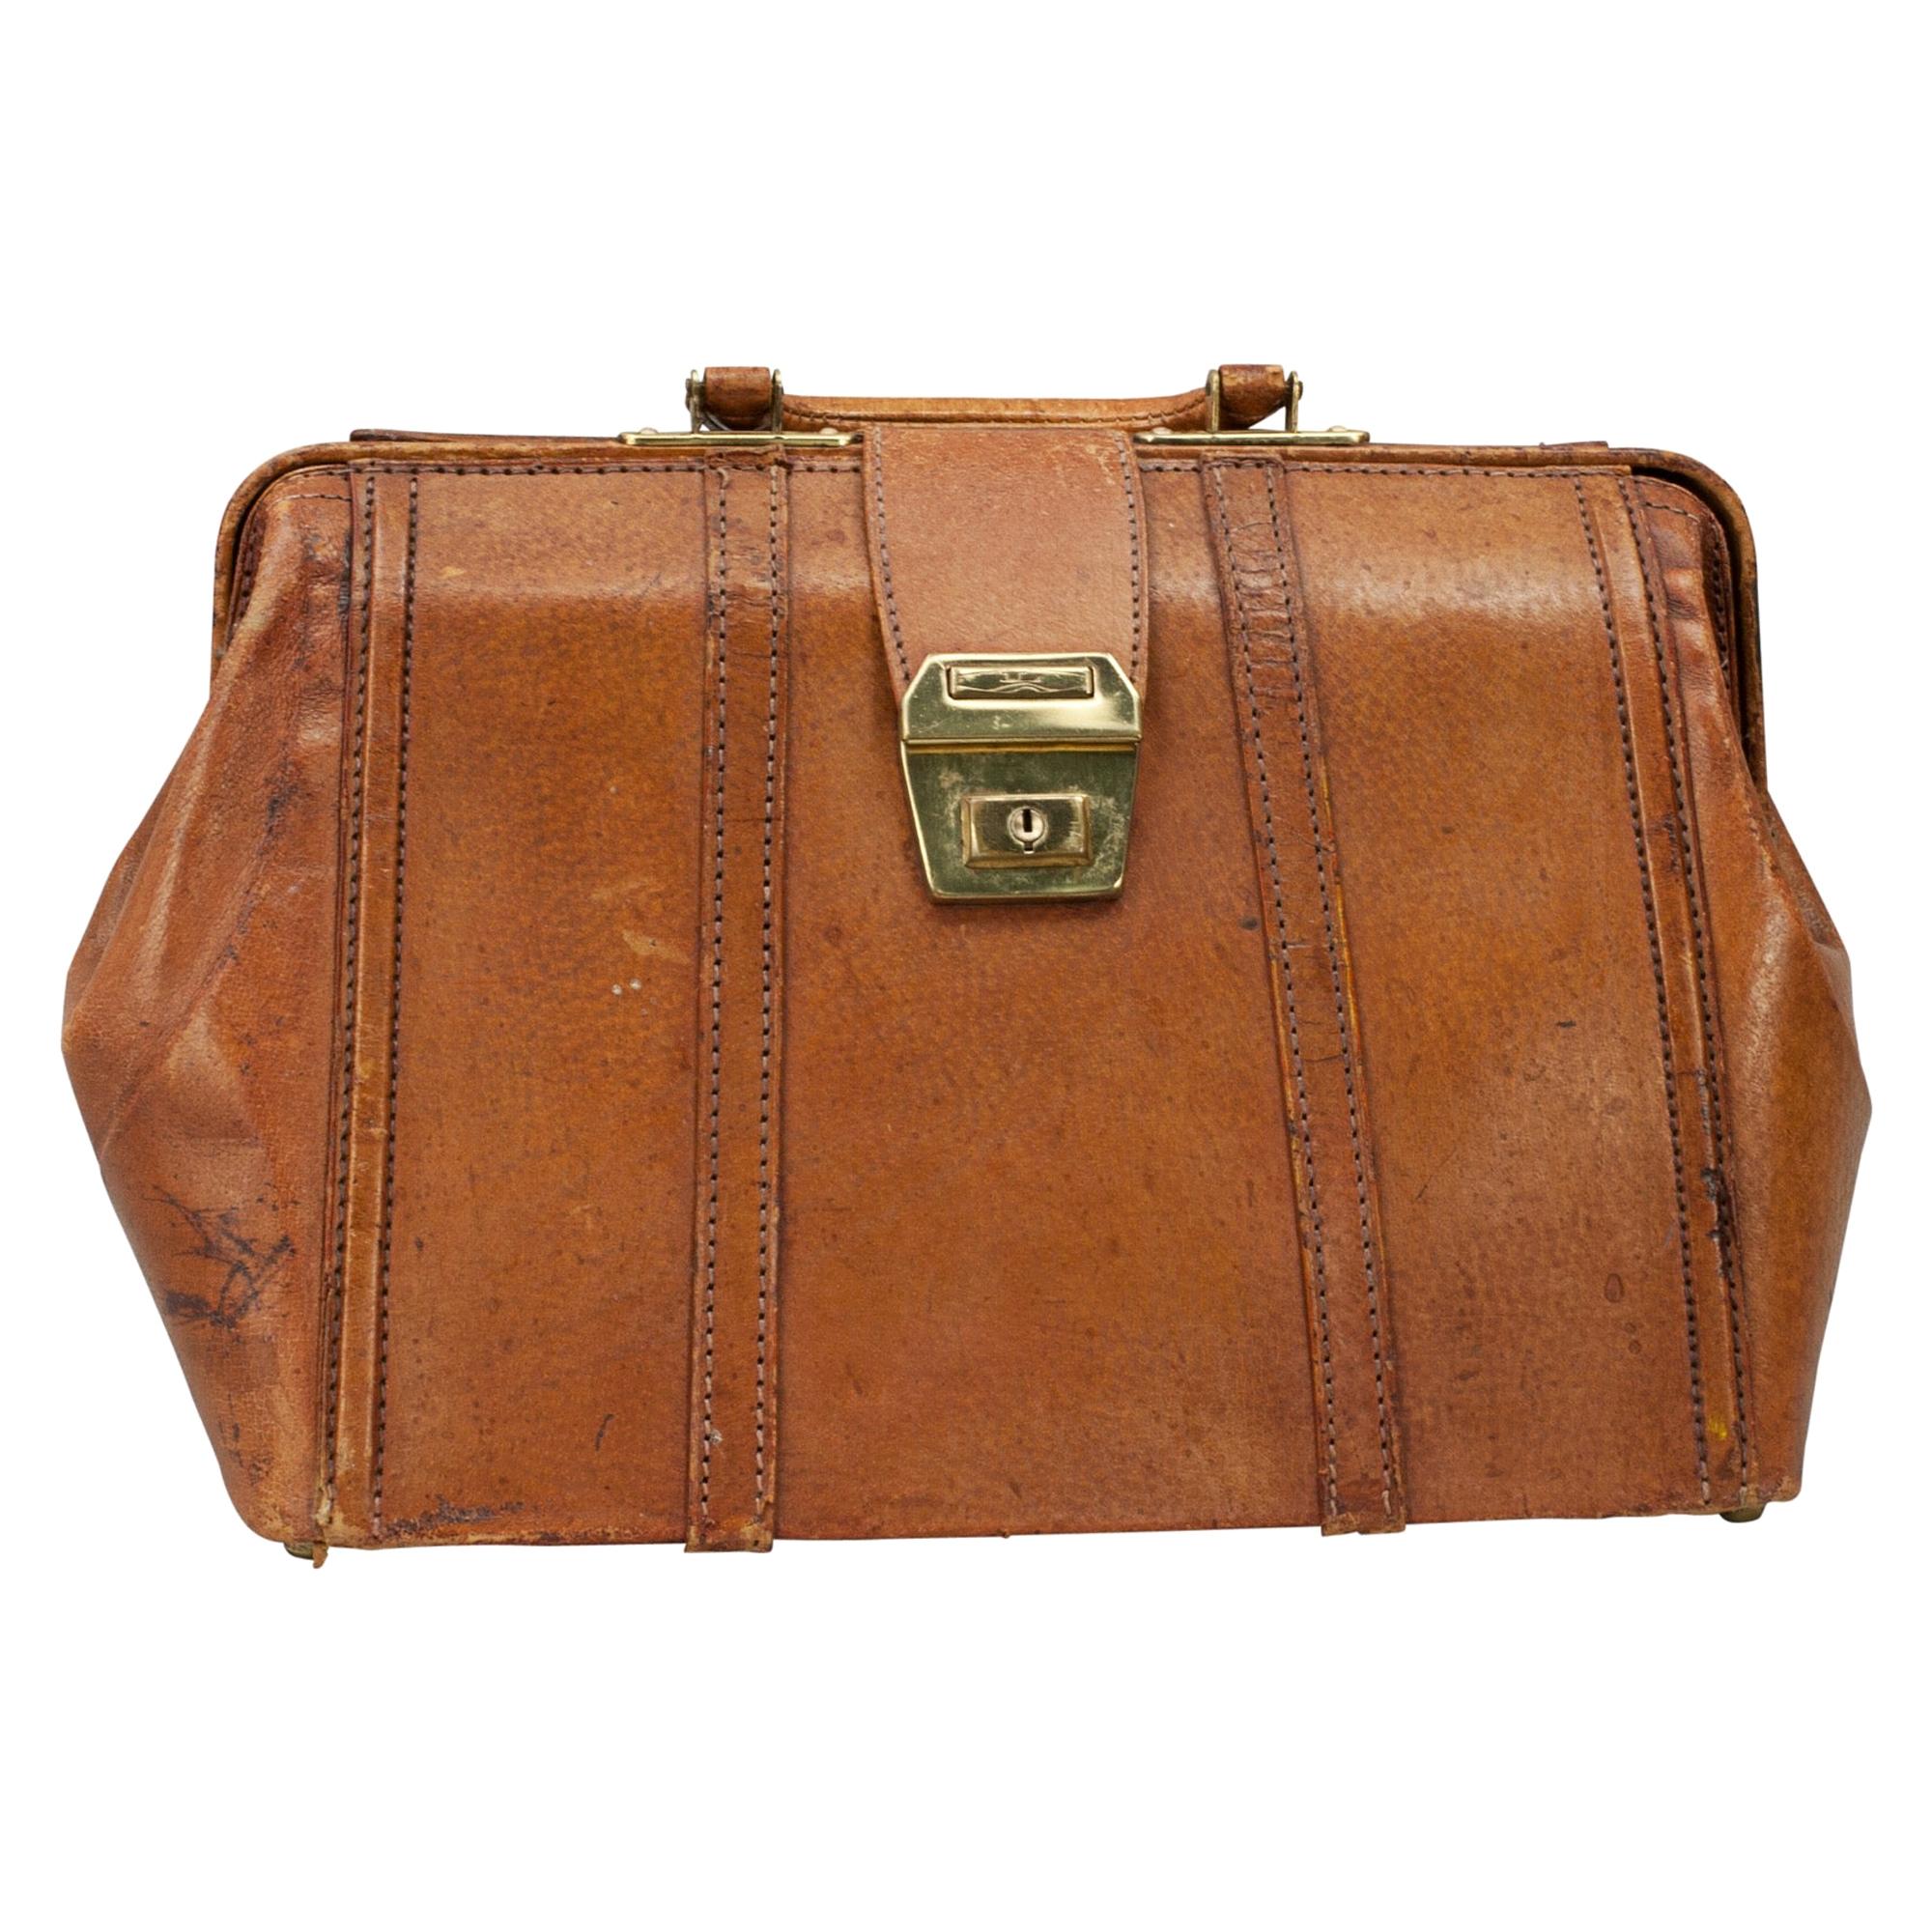 Vintage Leather Bag with Carry Handles